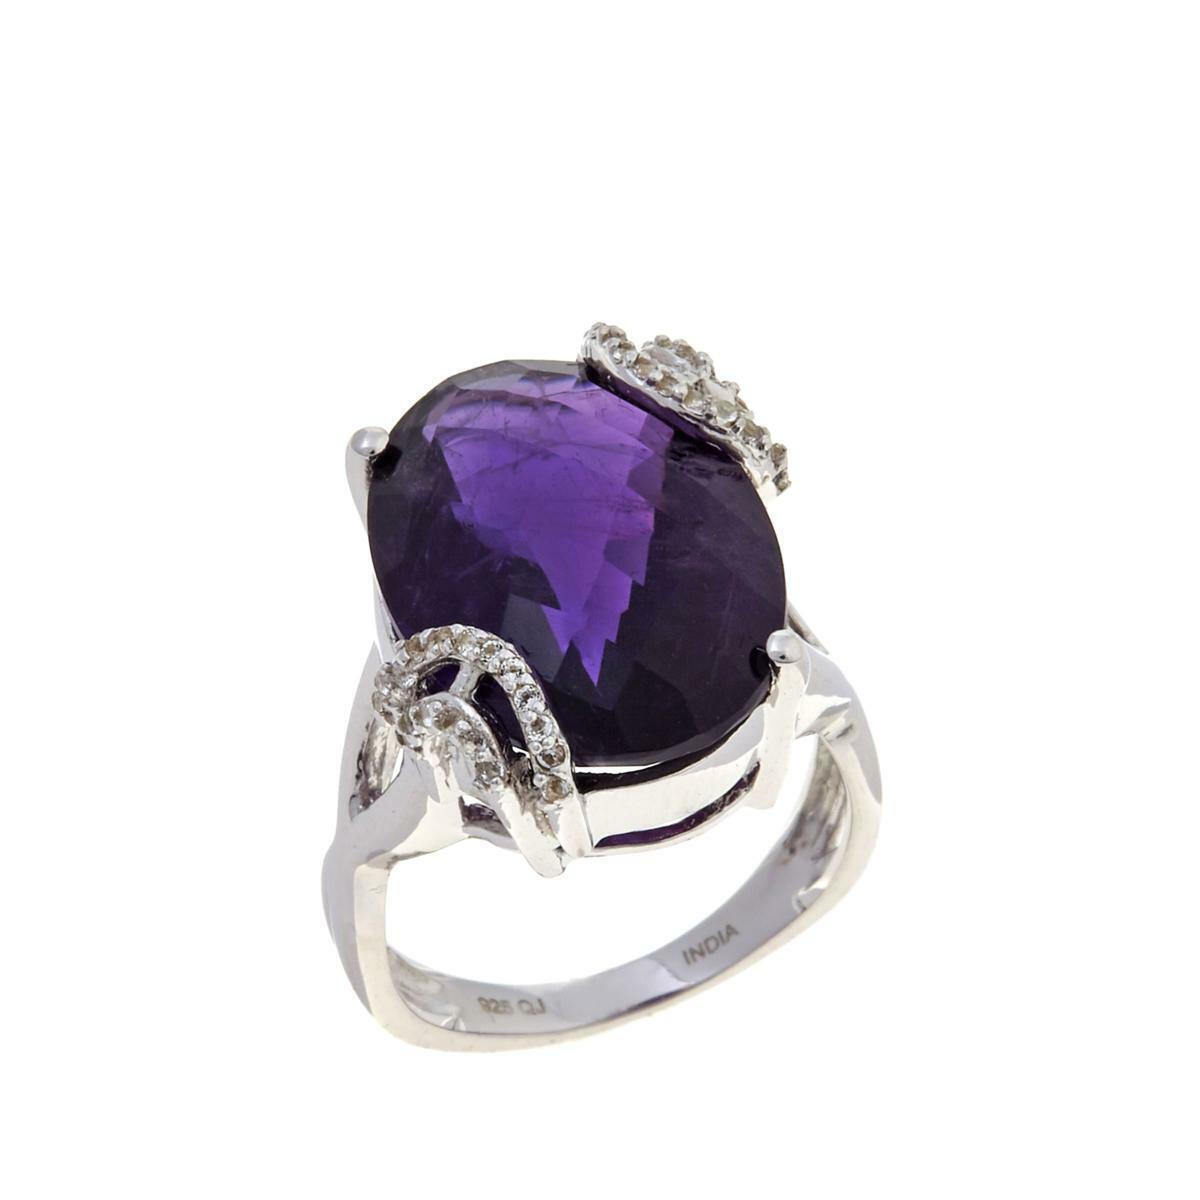 Colleen Lopez Amethyst Solitaire & White Topaz Sterling Silver Ring, Size 6